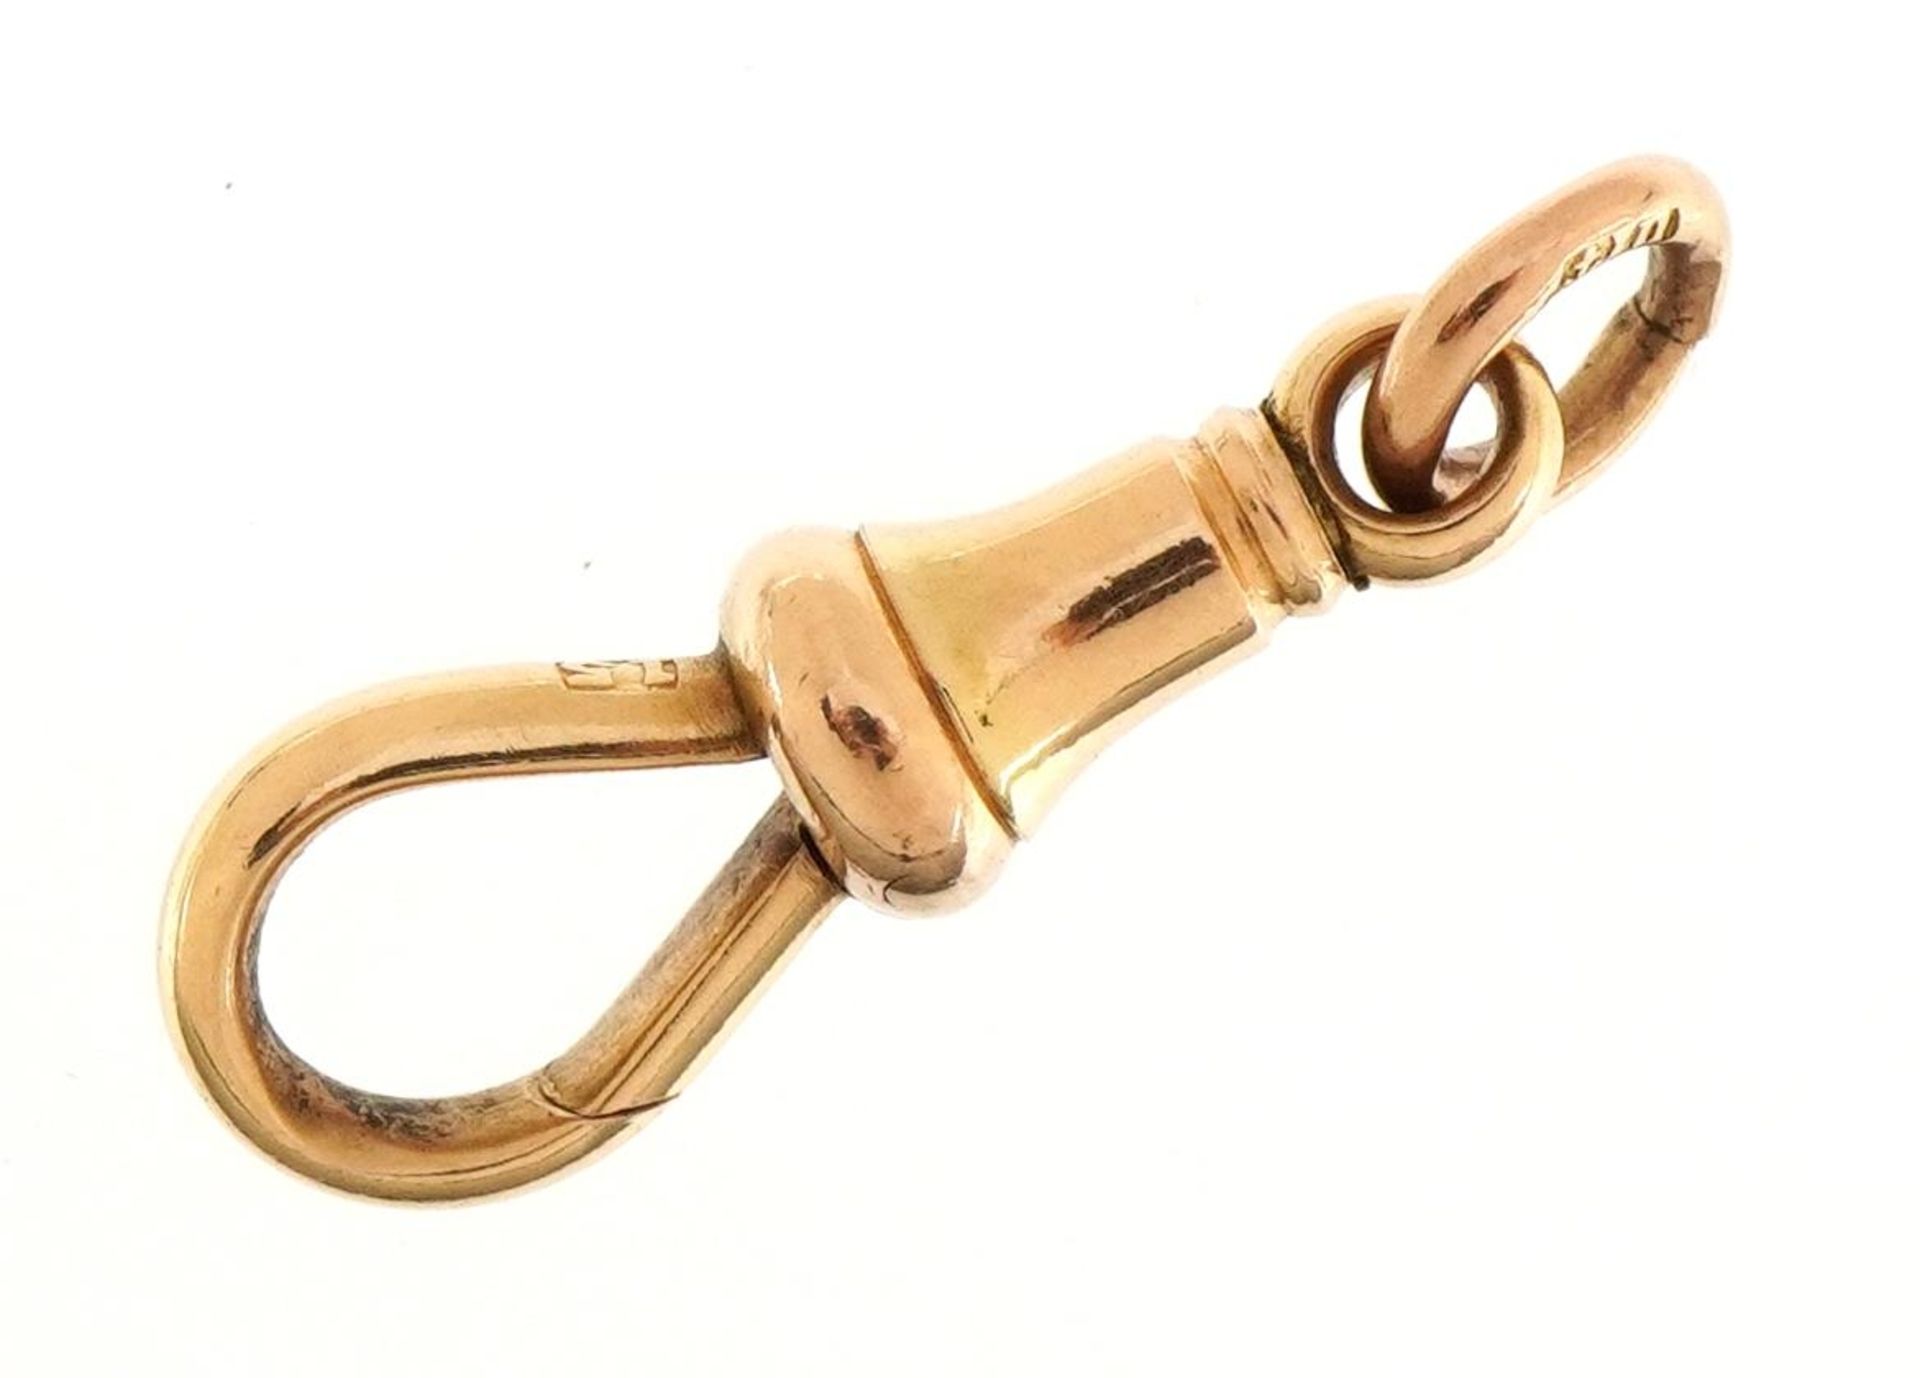 15ct rose gold jewellery swivel clasp, 2.0cm in length, 2.0g